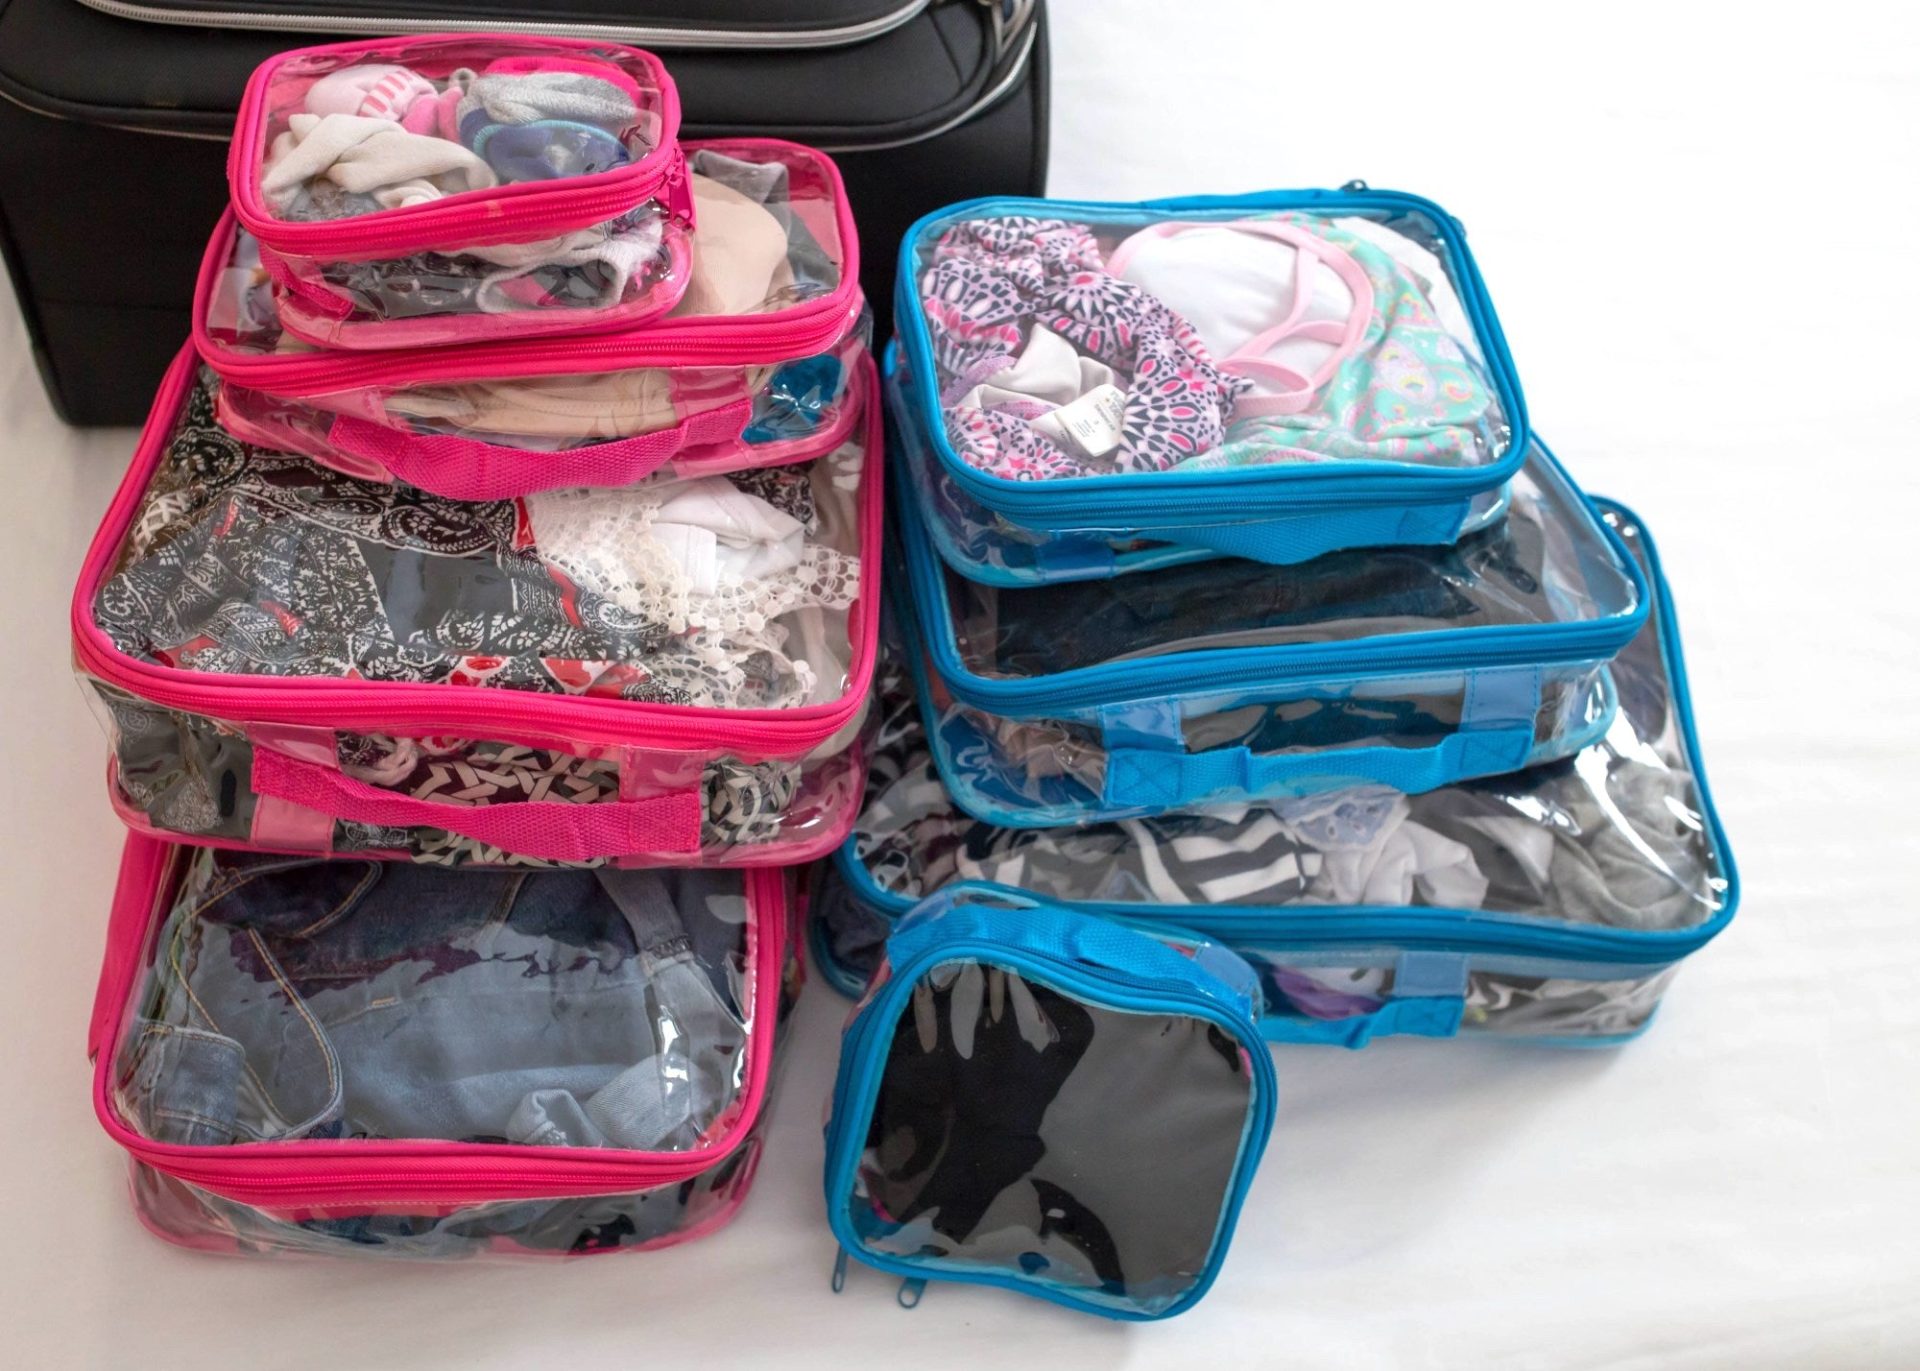 Packing organizers for travel